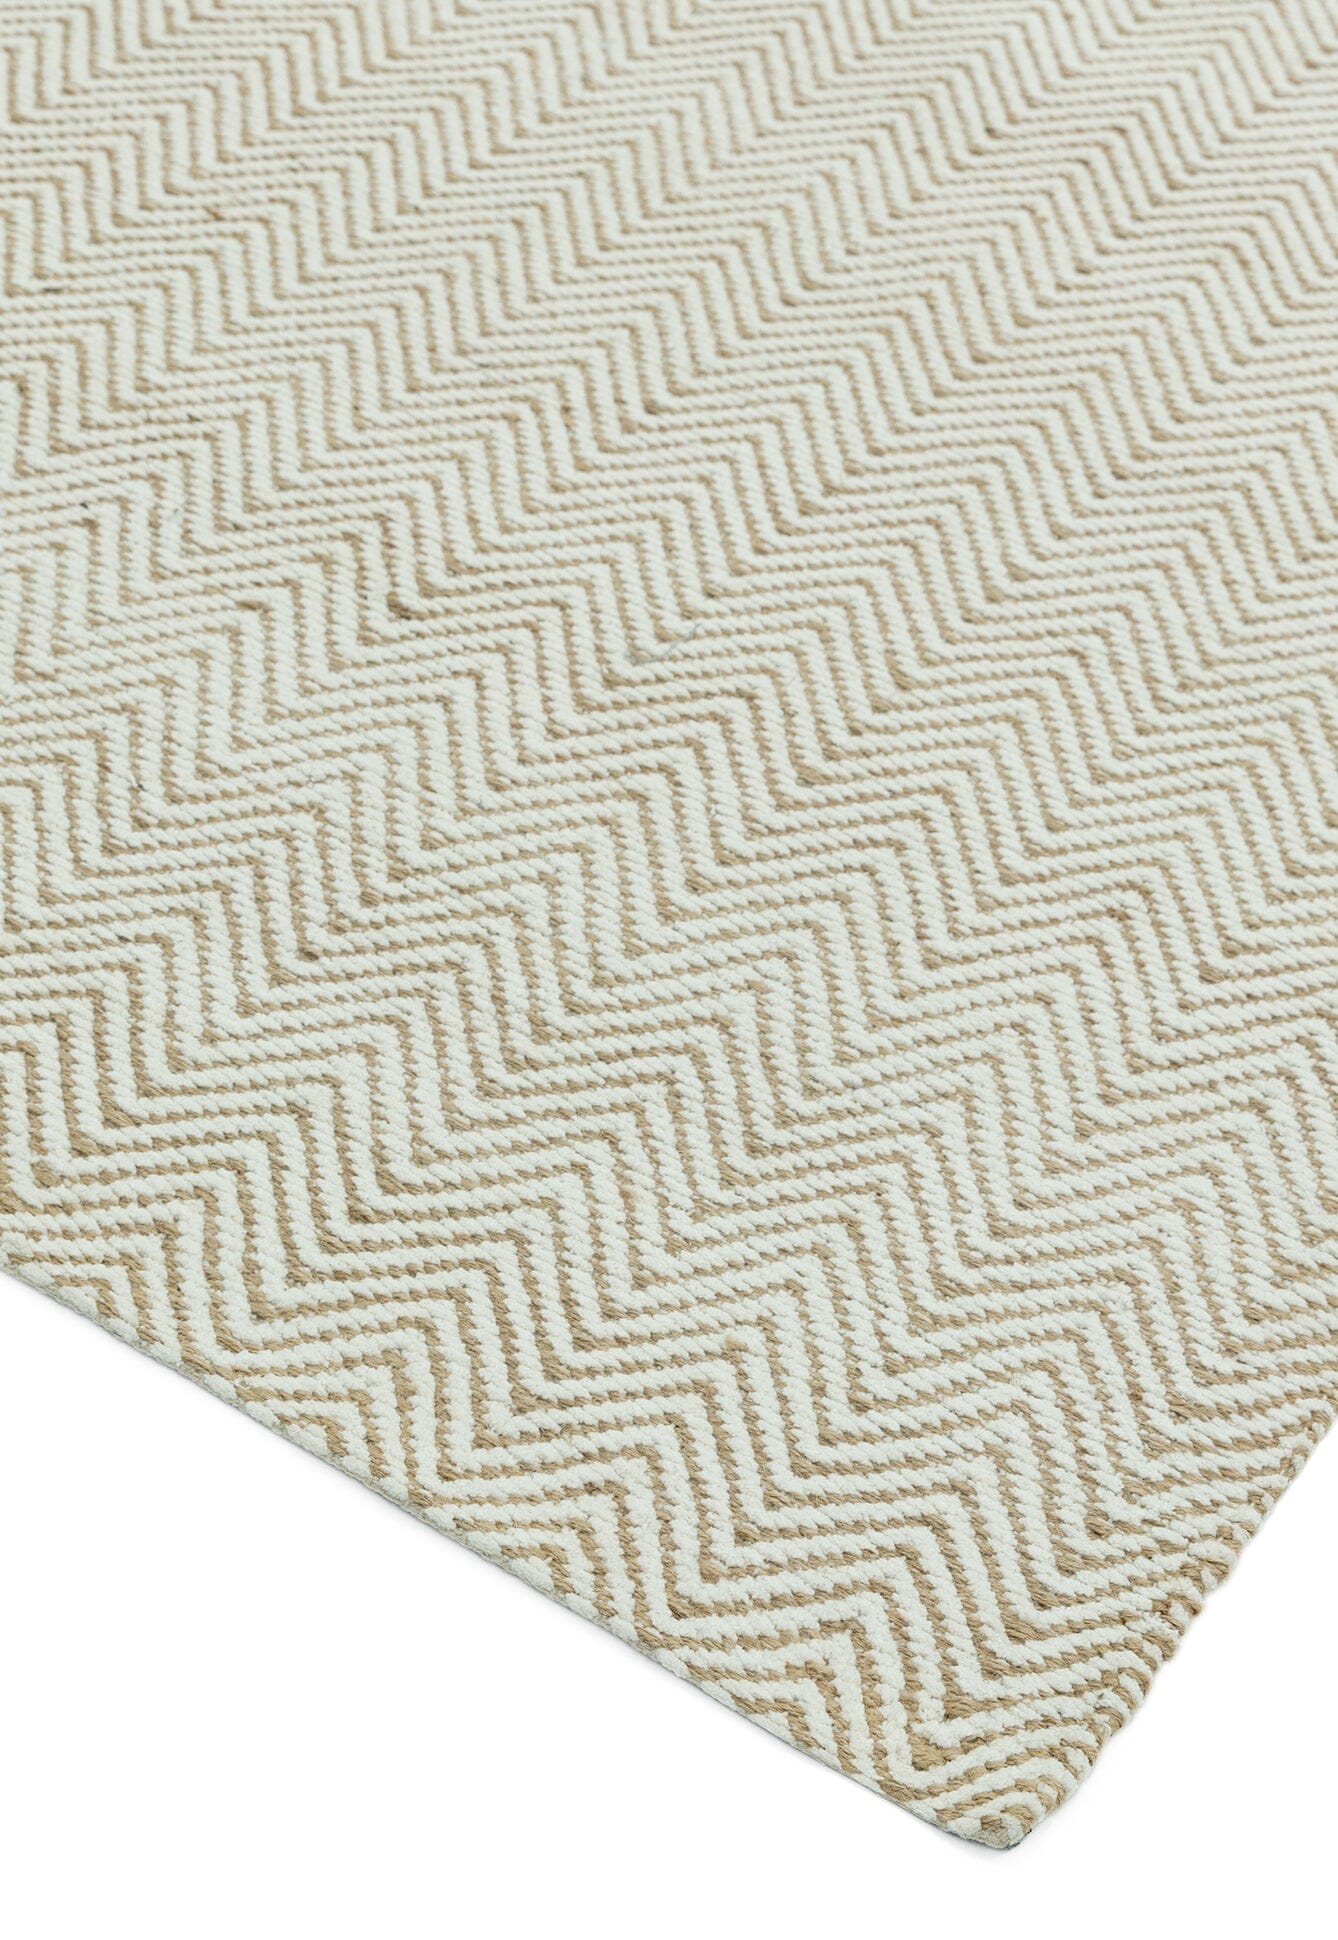  Asiatic Carpets-Asiatic Carpets Ives Hand Woven Rug Natural - 160 x 230cm-Black, White 789 